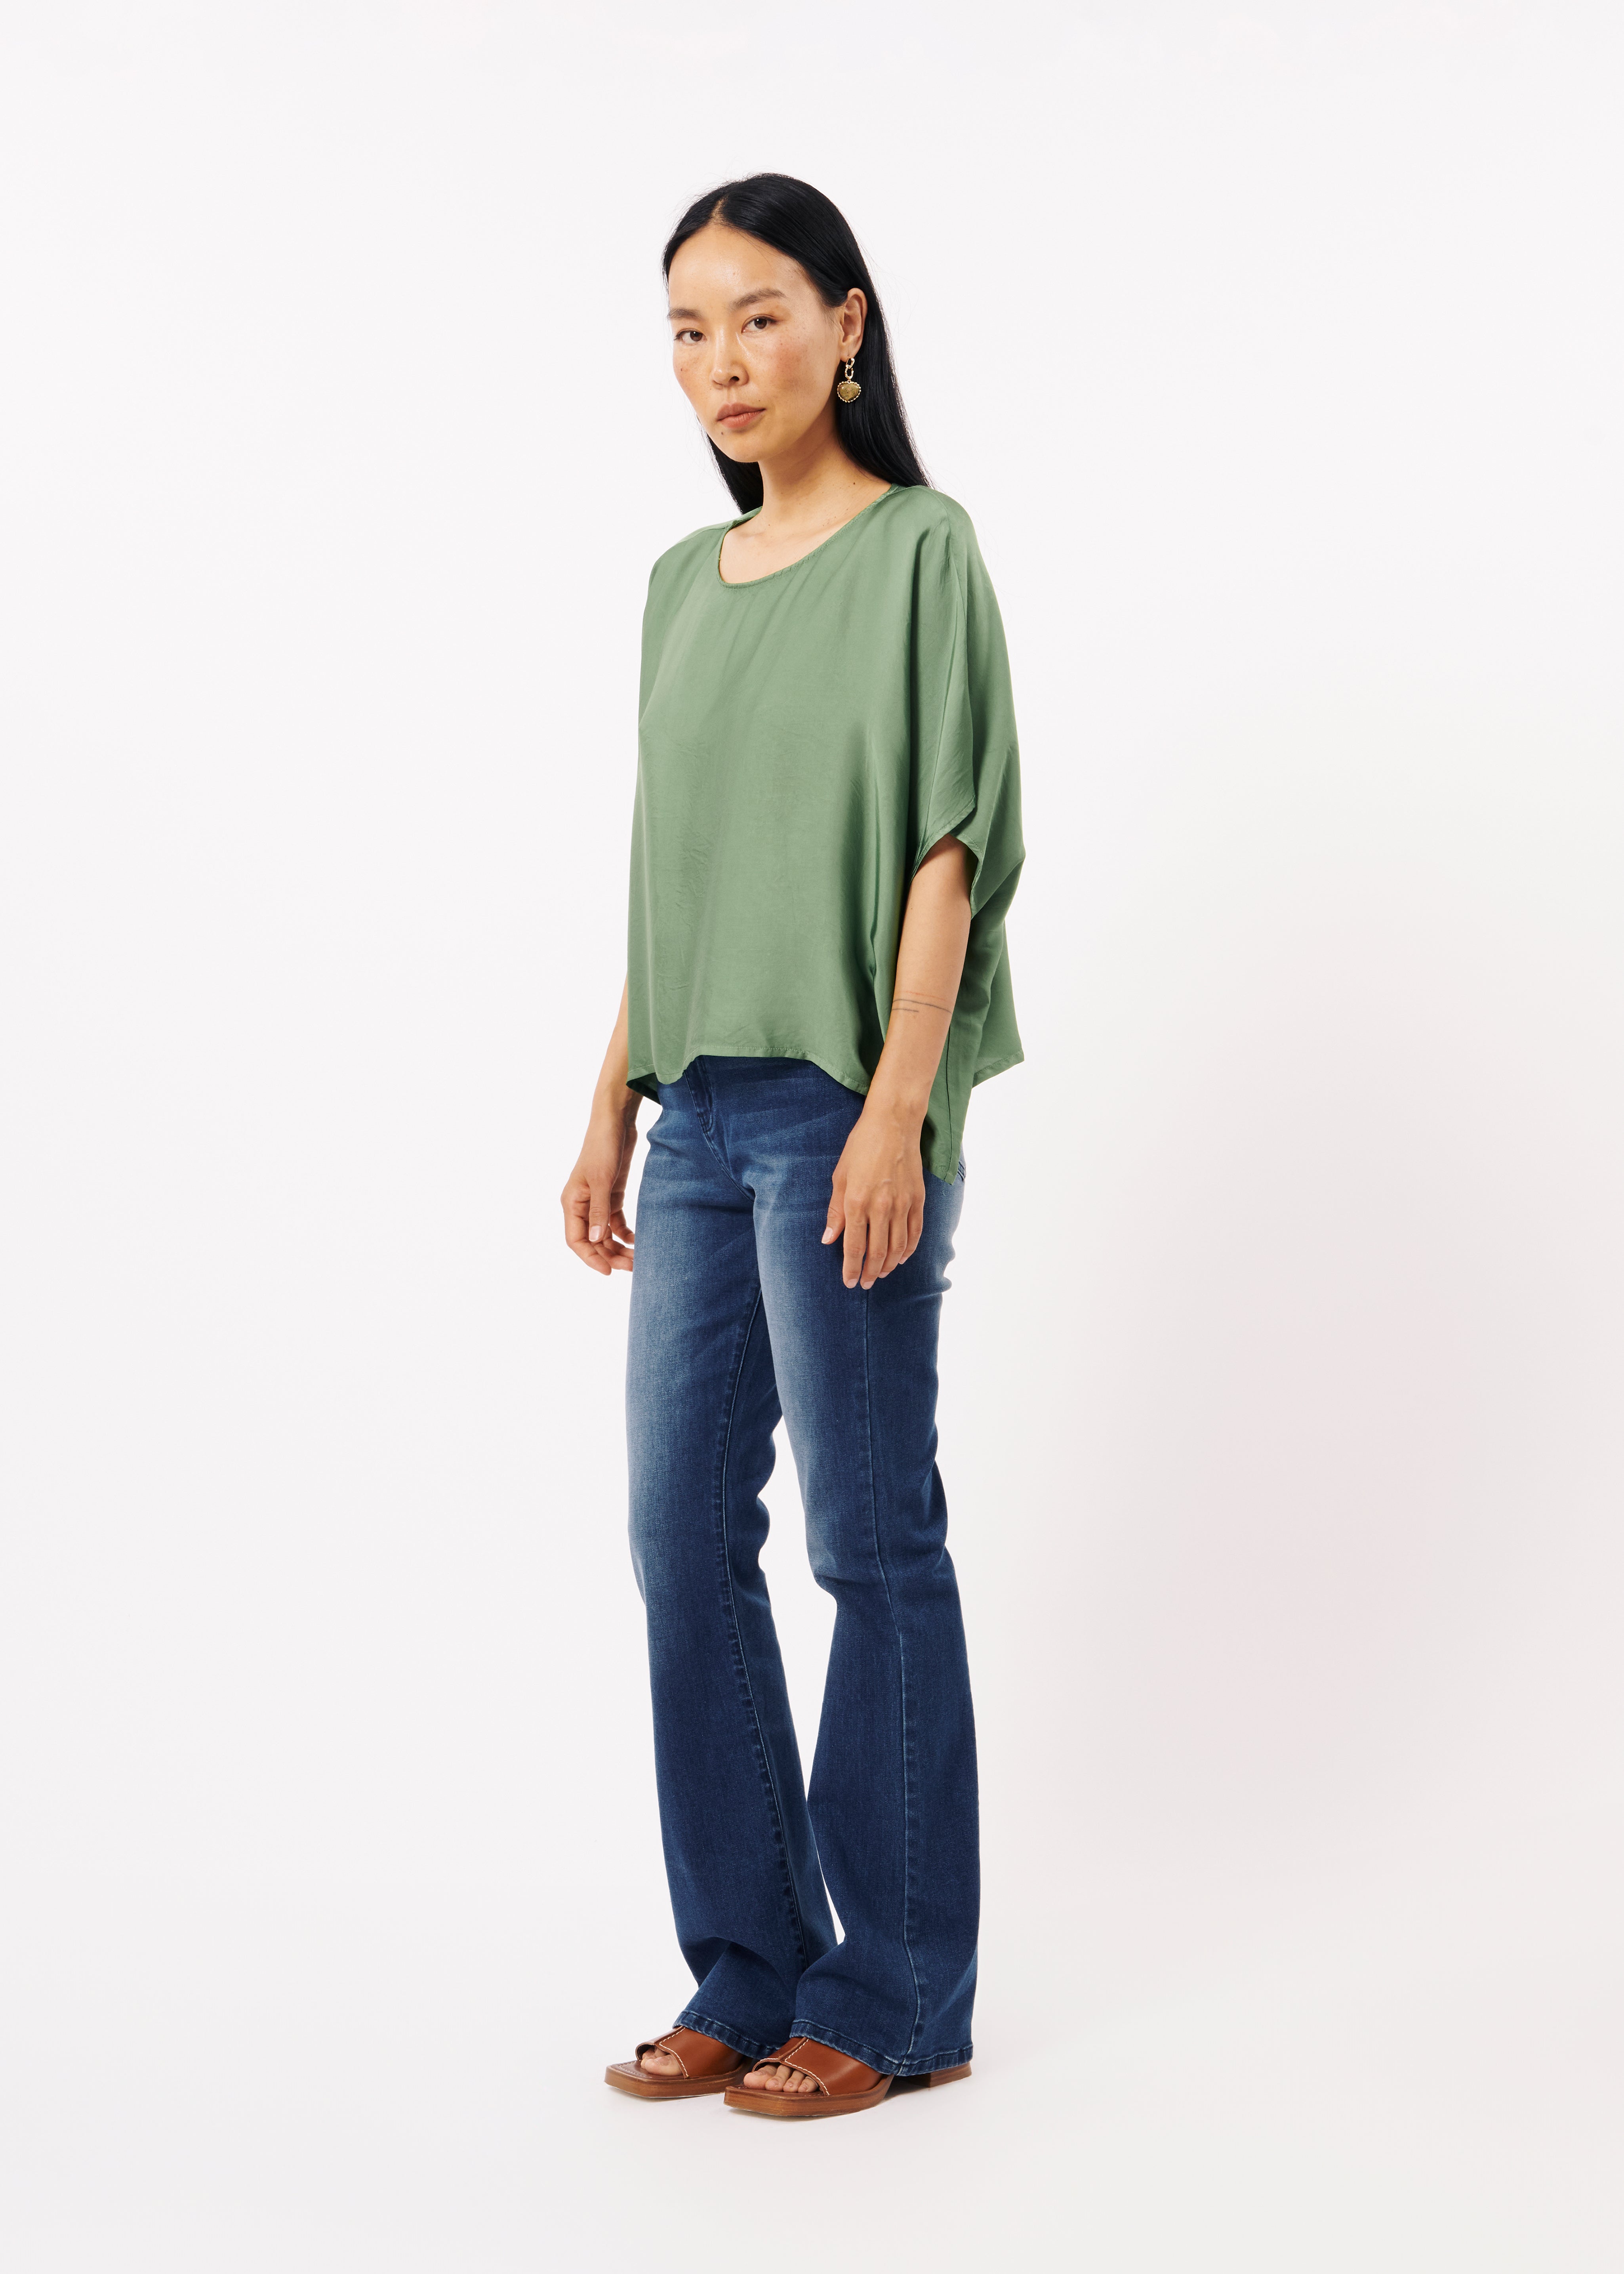 SIA Olive Top